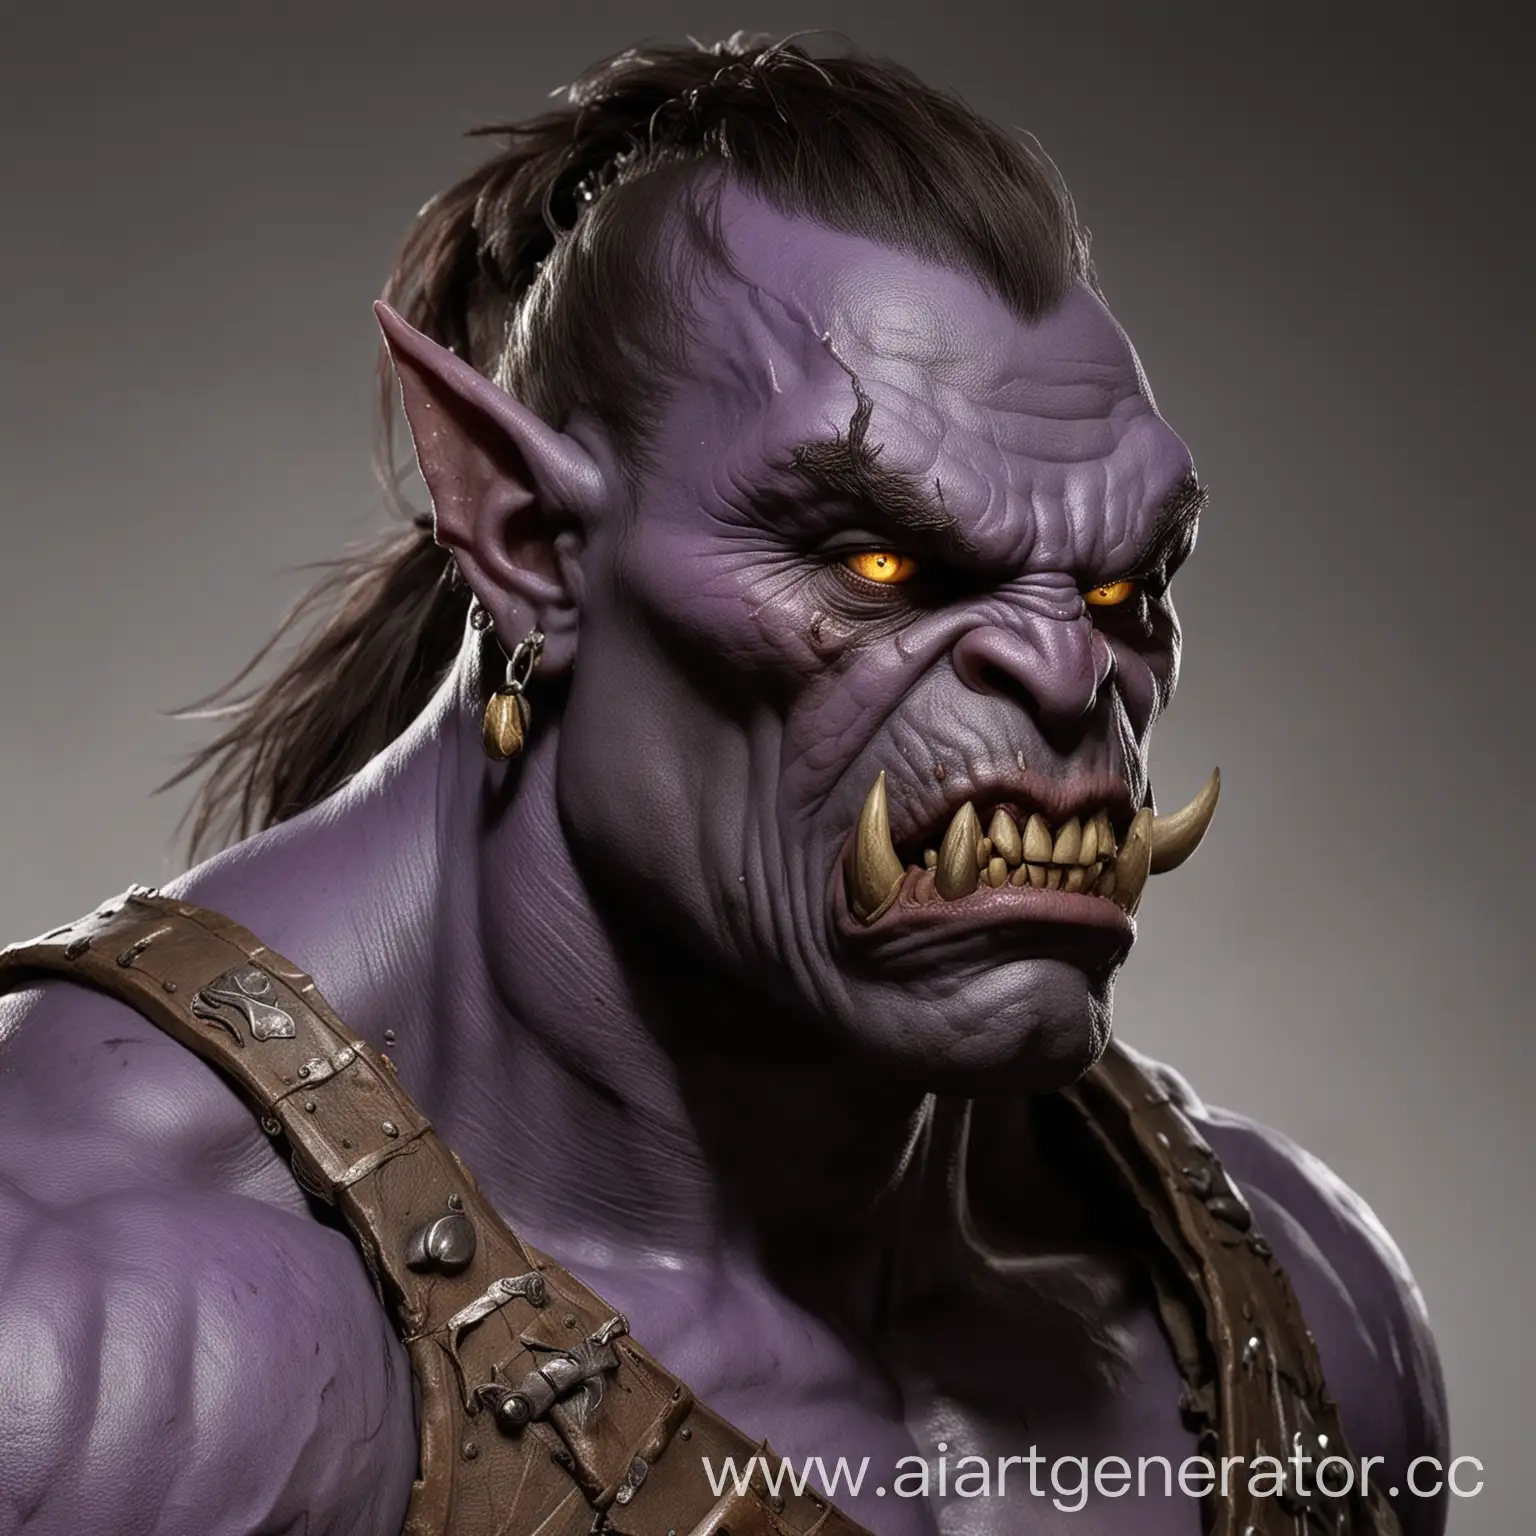 Realistic-Portrait-of-a-Muscular-Purple-Orc-with-Unique-Features